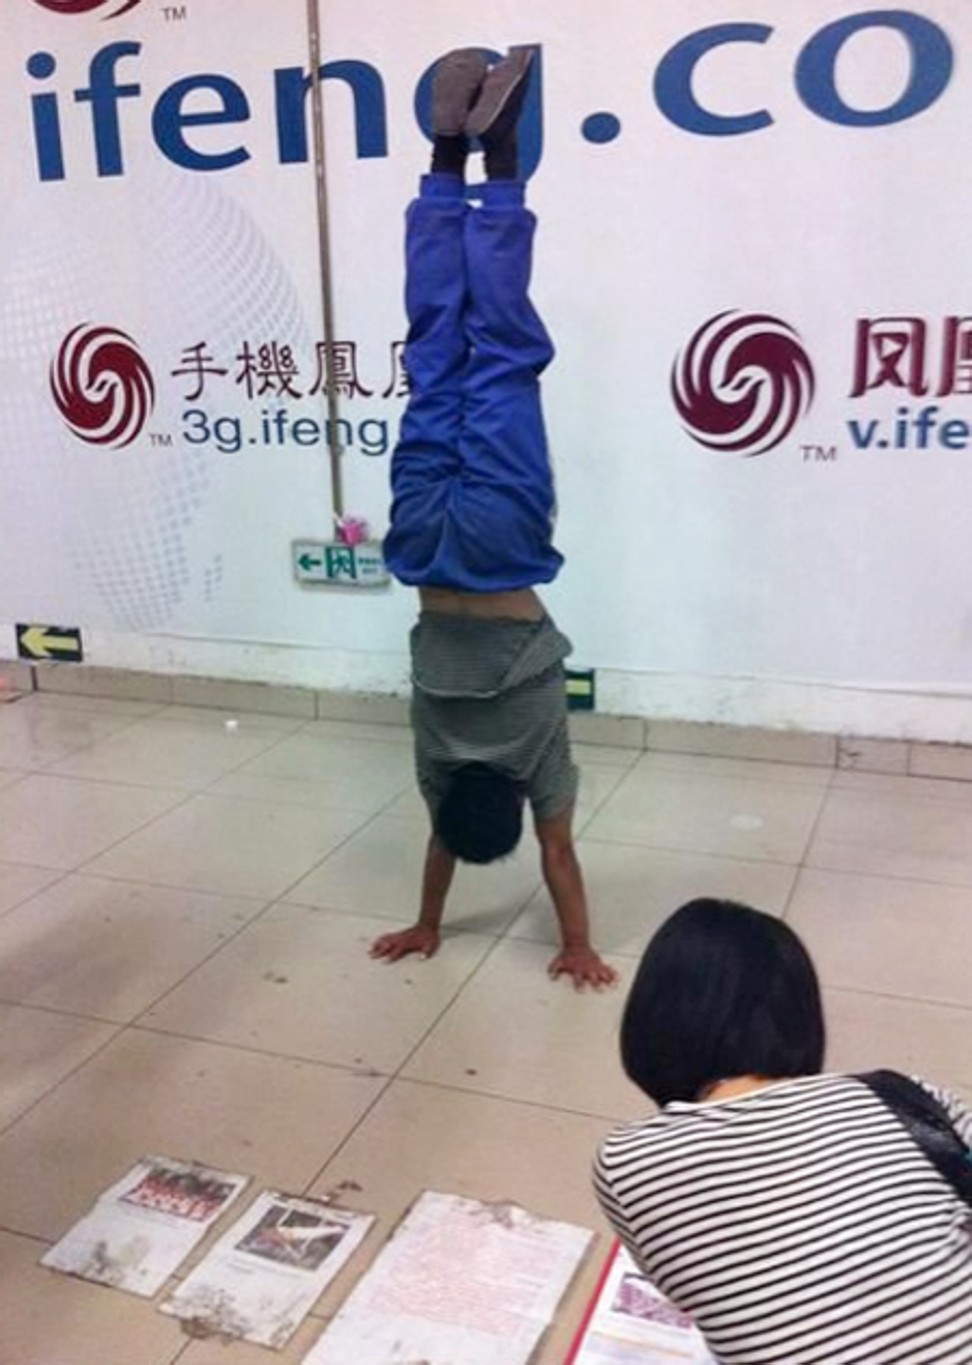 Zhang Shangwu, a former gymnastics world champion and double gold medallist, tried to earn a living as a street performer in Beijing after his career ended. Photo: Handout